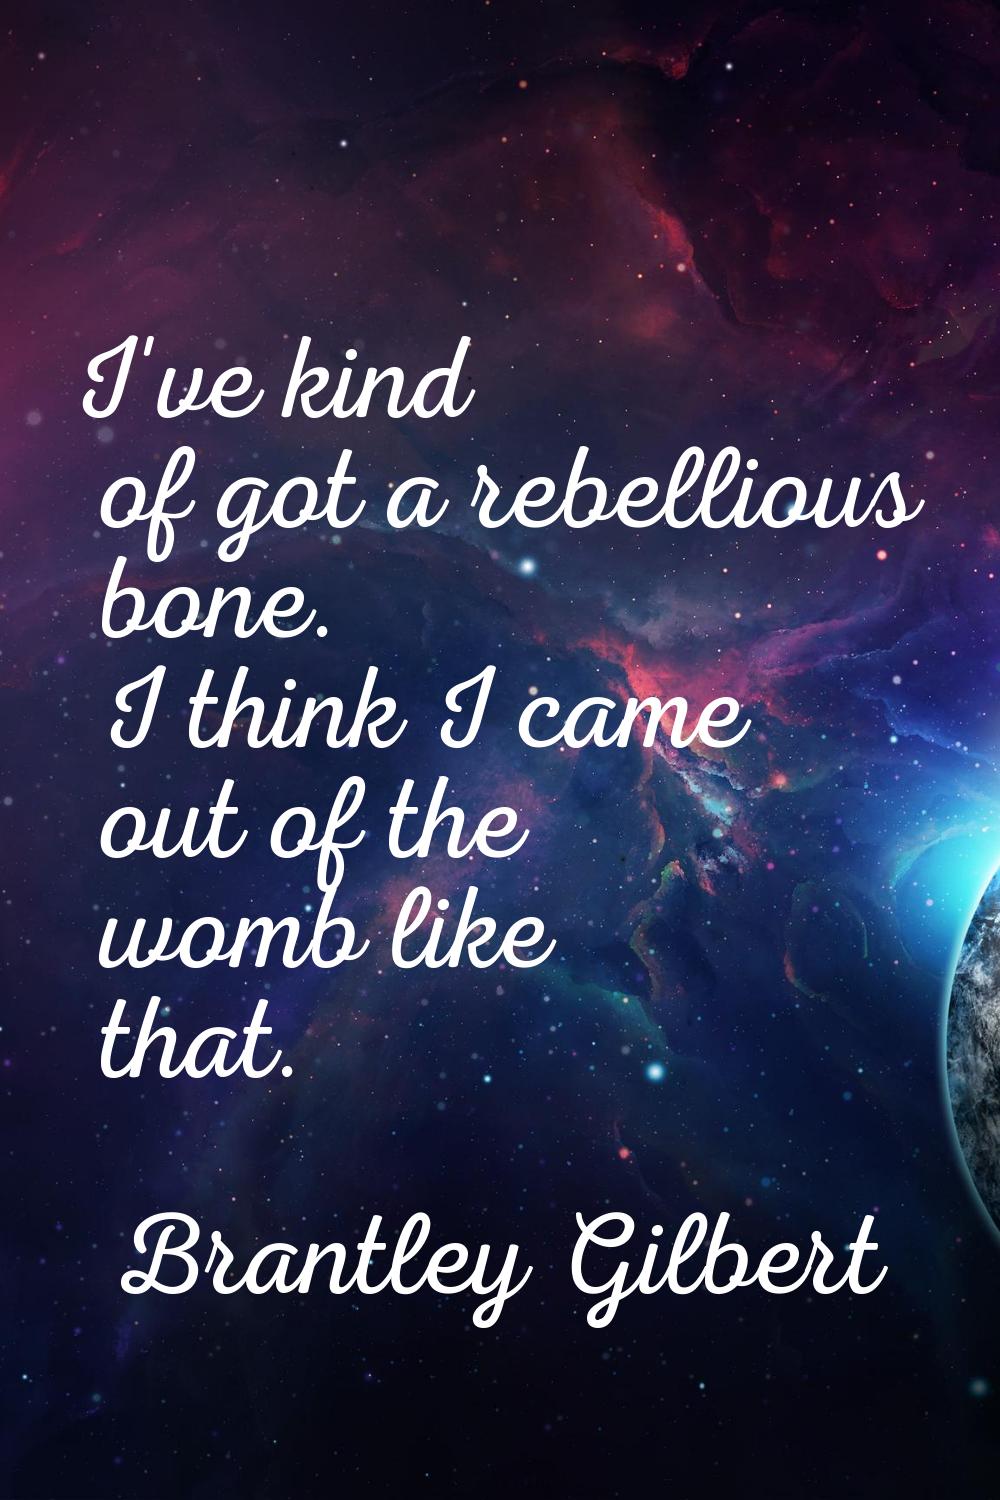 I've kind of got a rebellious bone. I think I came out of the womb like that.